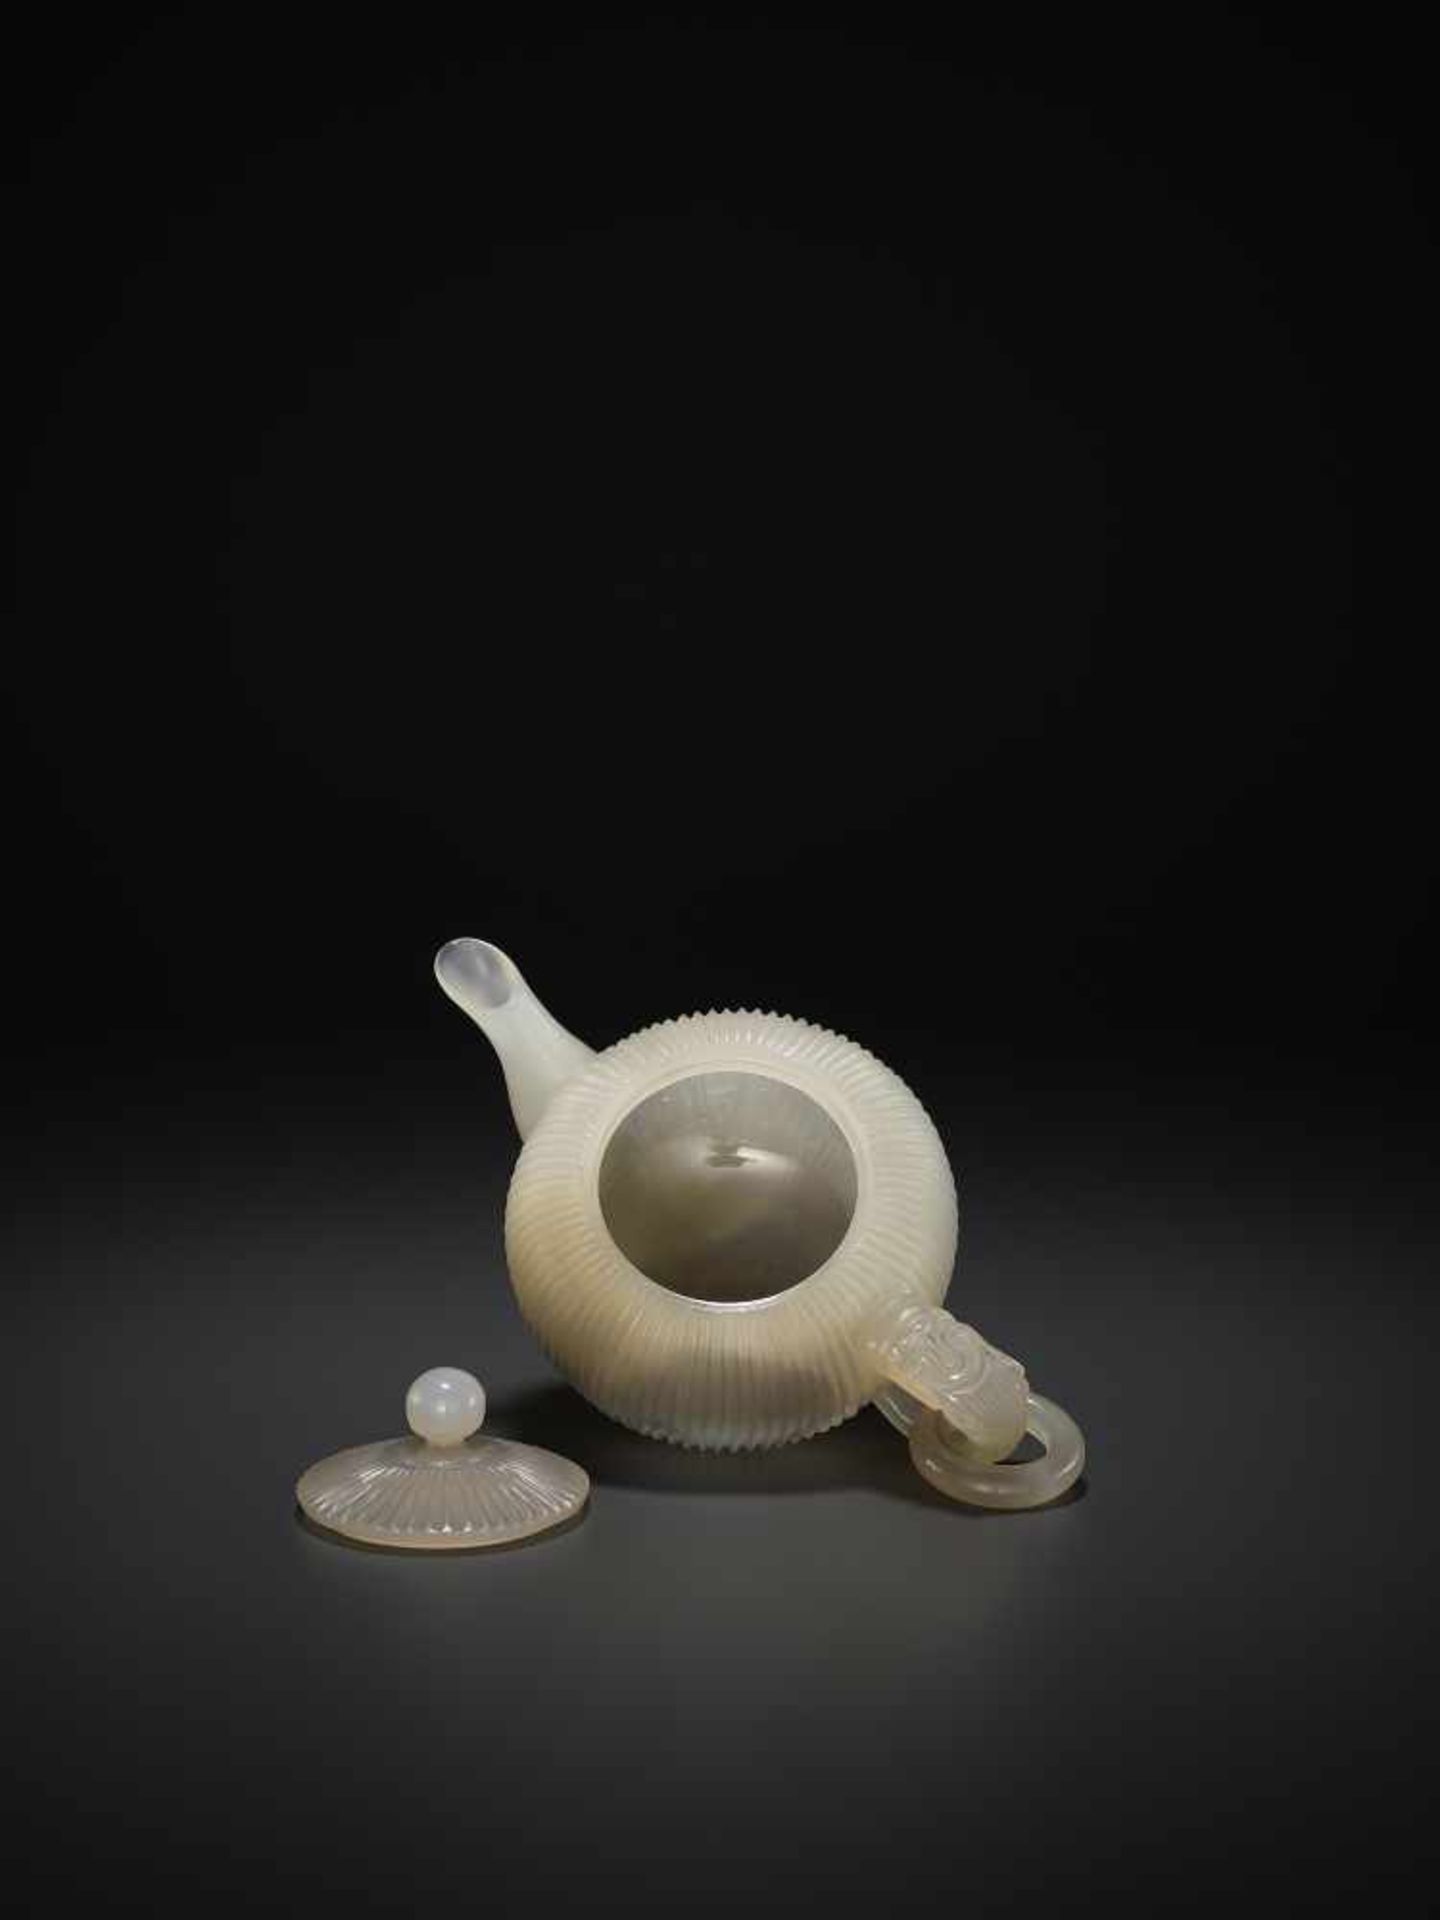 A MUGHAL STYLE AGATE TEAPOT, QING DYNASTY China, 1644-1911. Finely carved with a ribbed body and - Image 9 of 11